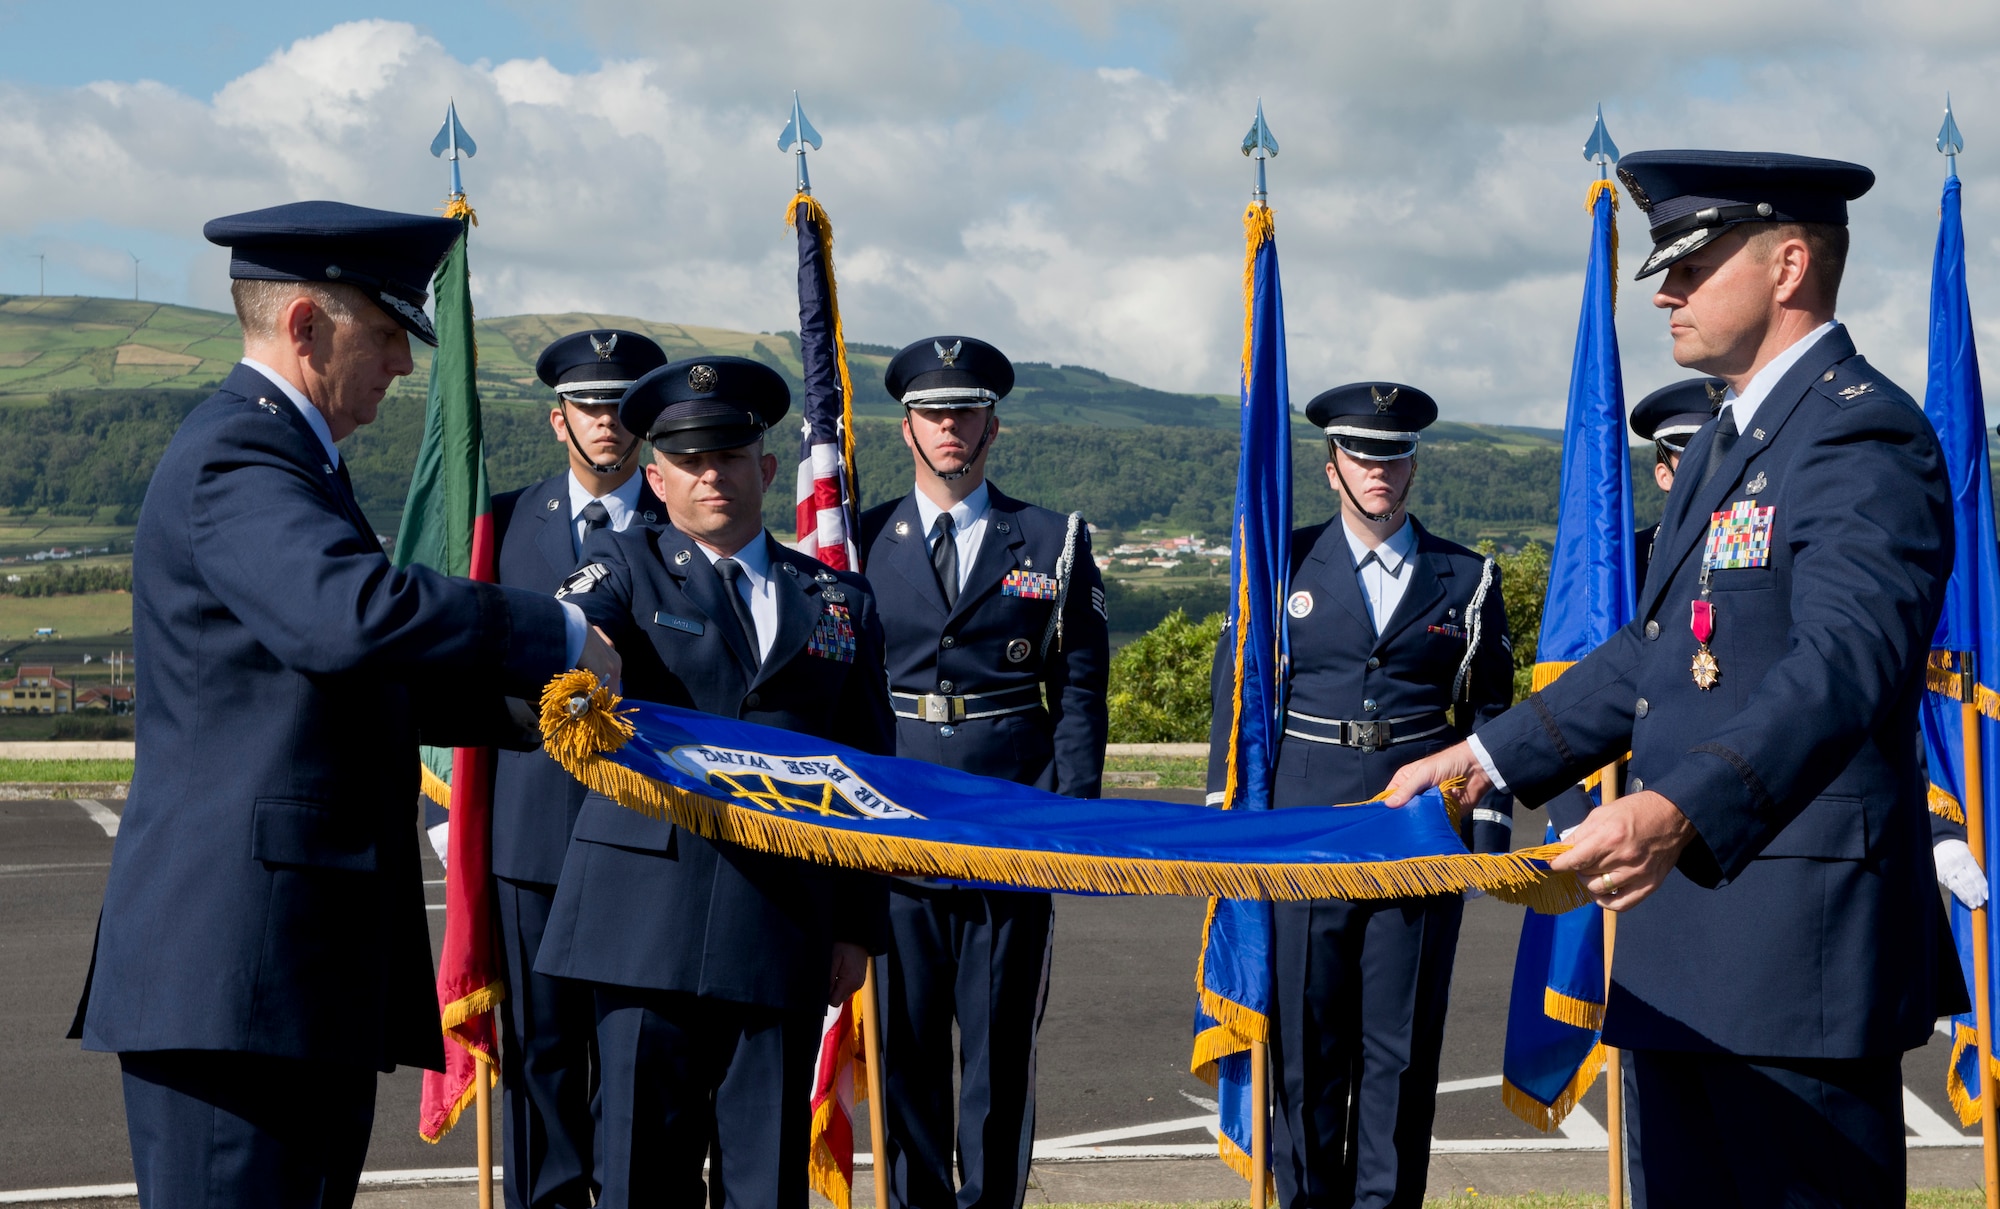 Lt. Gen. Timothy Ray, commander of the Third Air Force and 17th Expeditionary Air Force, and Col. Martin Rothrock, commander of the 65th Air Base Wing, furl and encase the 65th Air Base Wing flag during a Redesignation Ceremony on Lajes Field, Azores, Portugal, August 14, 2015. With this Redesignation Ceremony the 65th Air Base Group is now aligned under the 86th Airlift Wing and remains positioned to provide agile combat support and services to aircraft and aircrews. (U.S. Air Force photo by Master Sgt. Bradley C. Church)